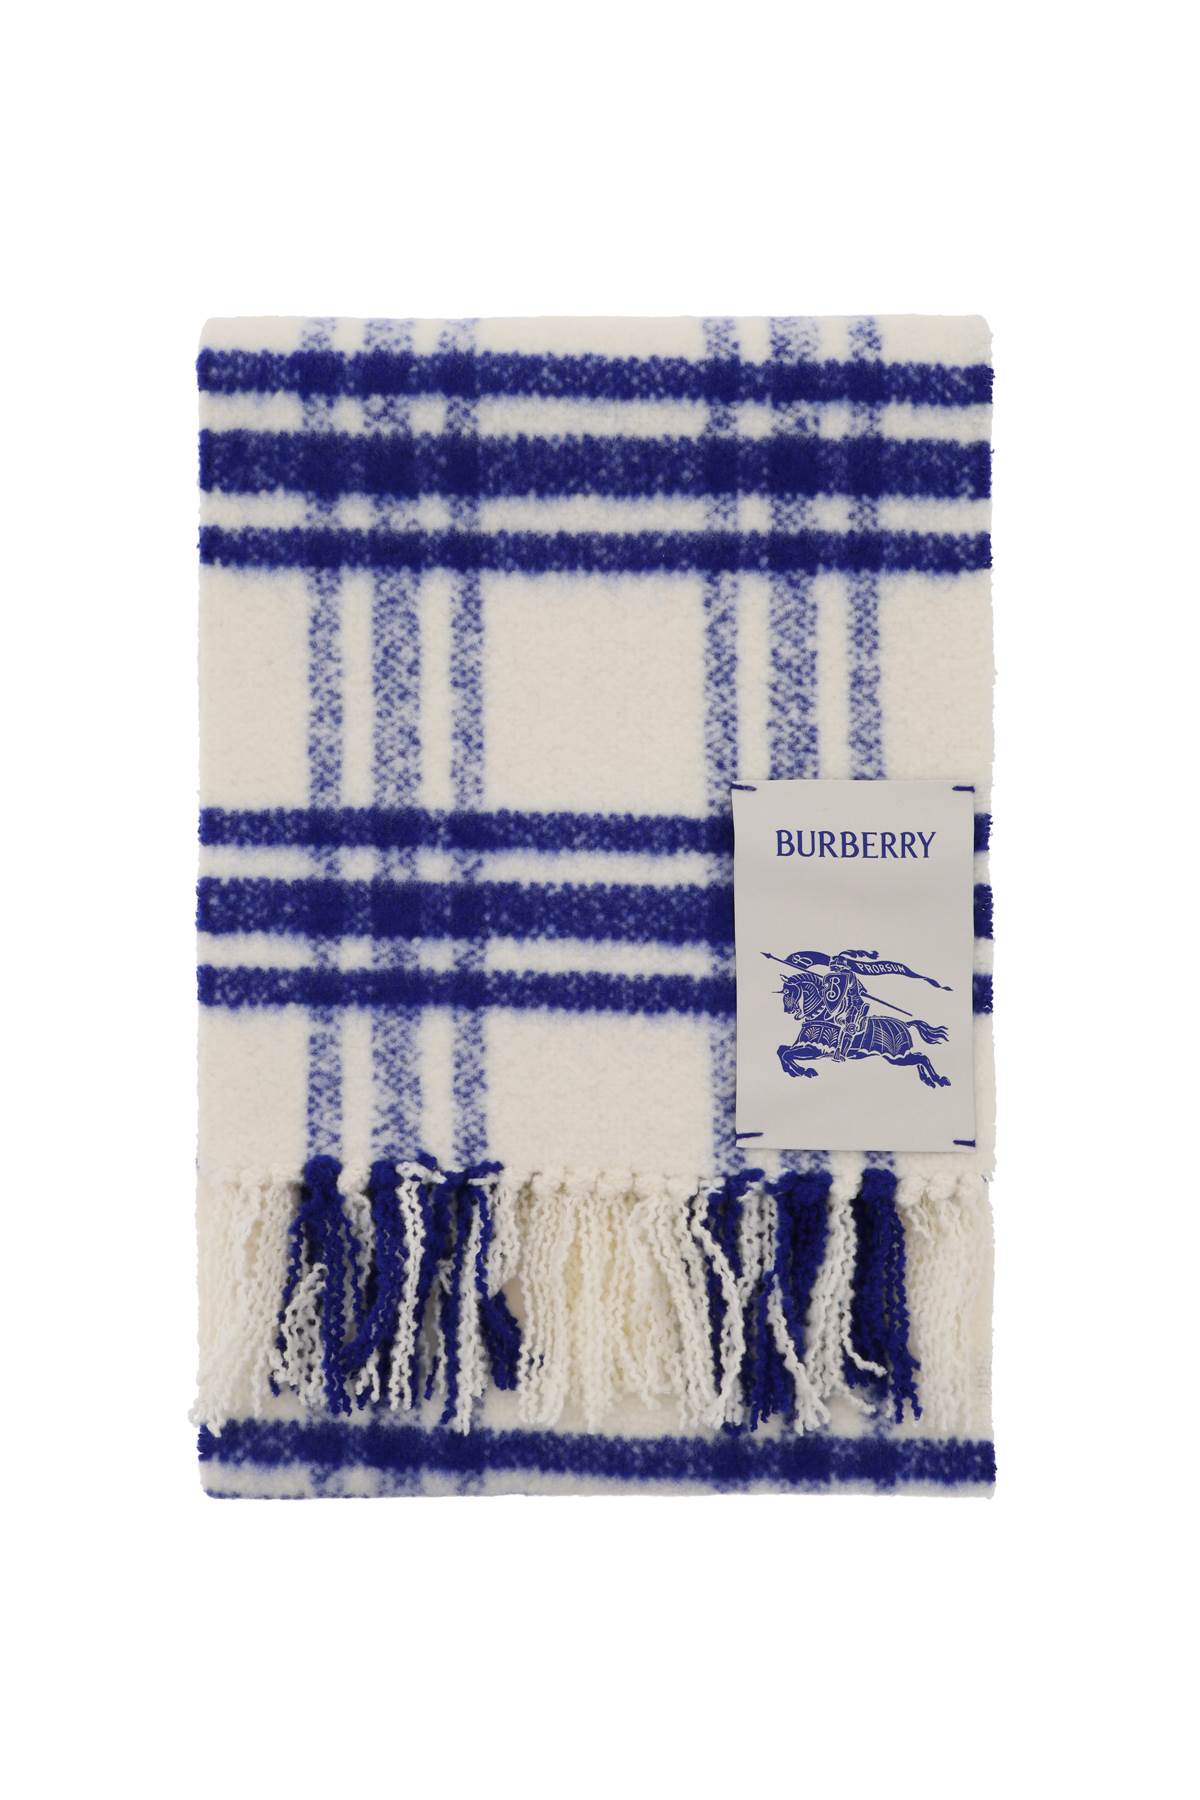 check wool scarf 8079267 KNIGHT